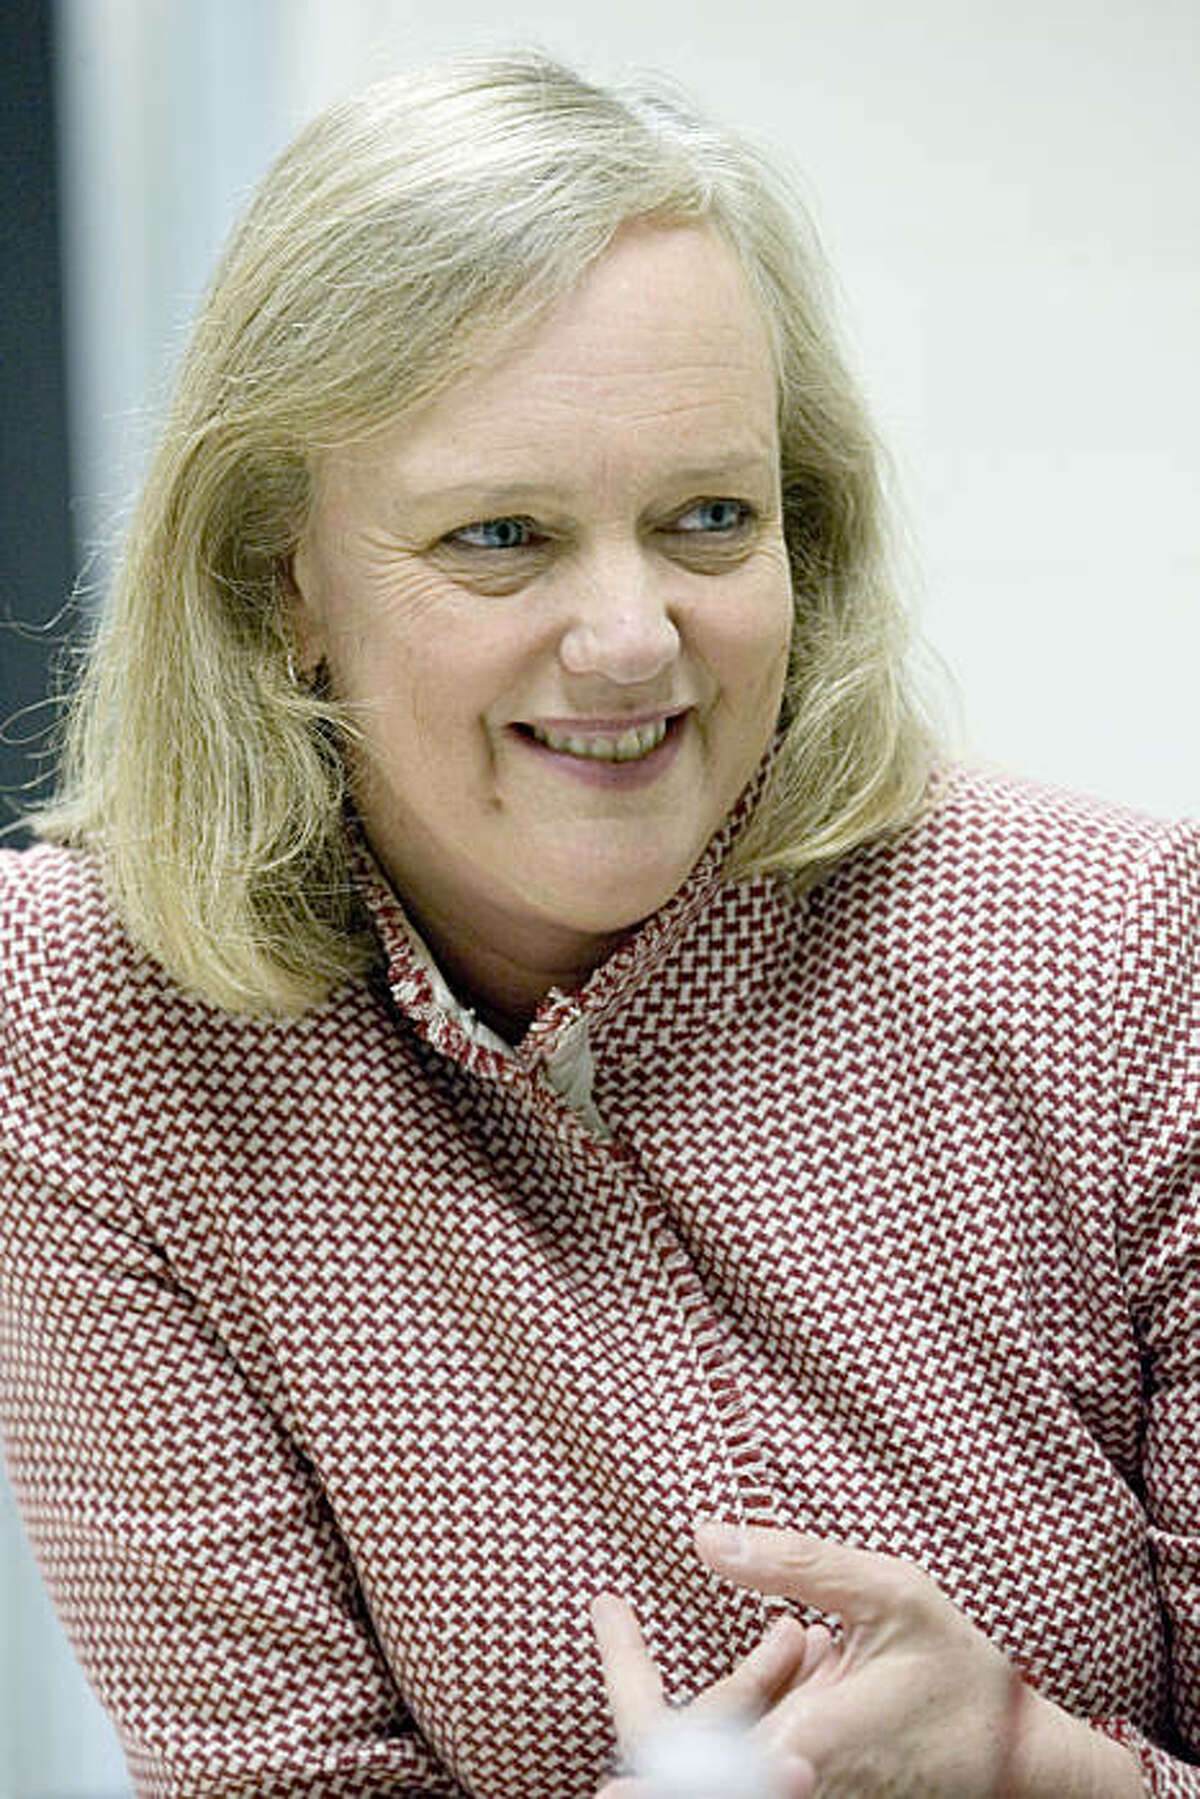 Republican gubernatorial candidate Meg Whitman talks with Chronicle columnist Debra J. Saunders (not pictured) after Whitman toured the Union Pacific Intermodal Facility in in Oakland, Calif. on Tuesday, March 9, 2010. Kat Wade / Special to the Chronicle